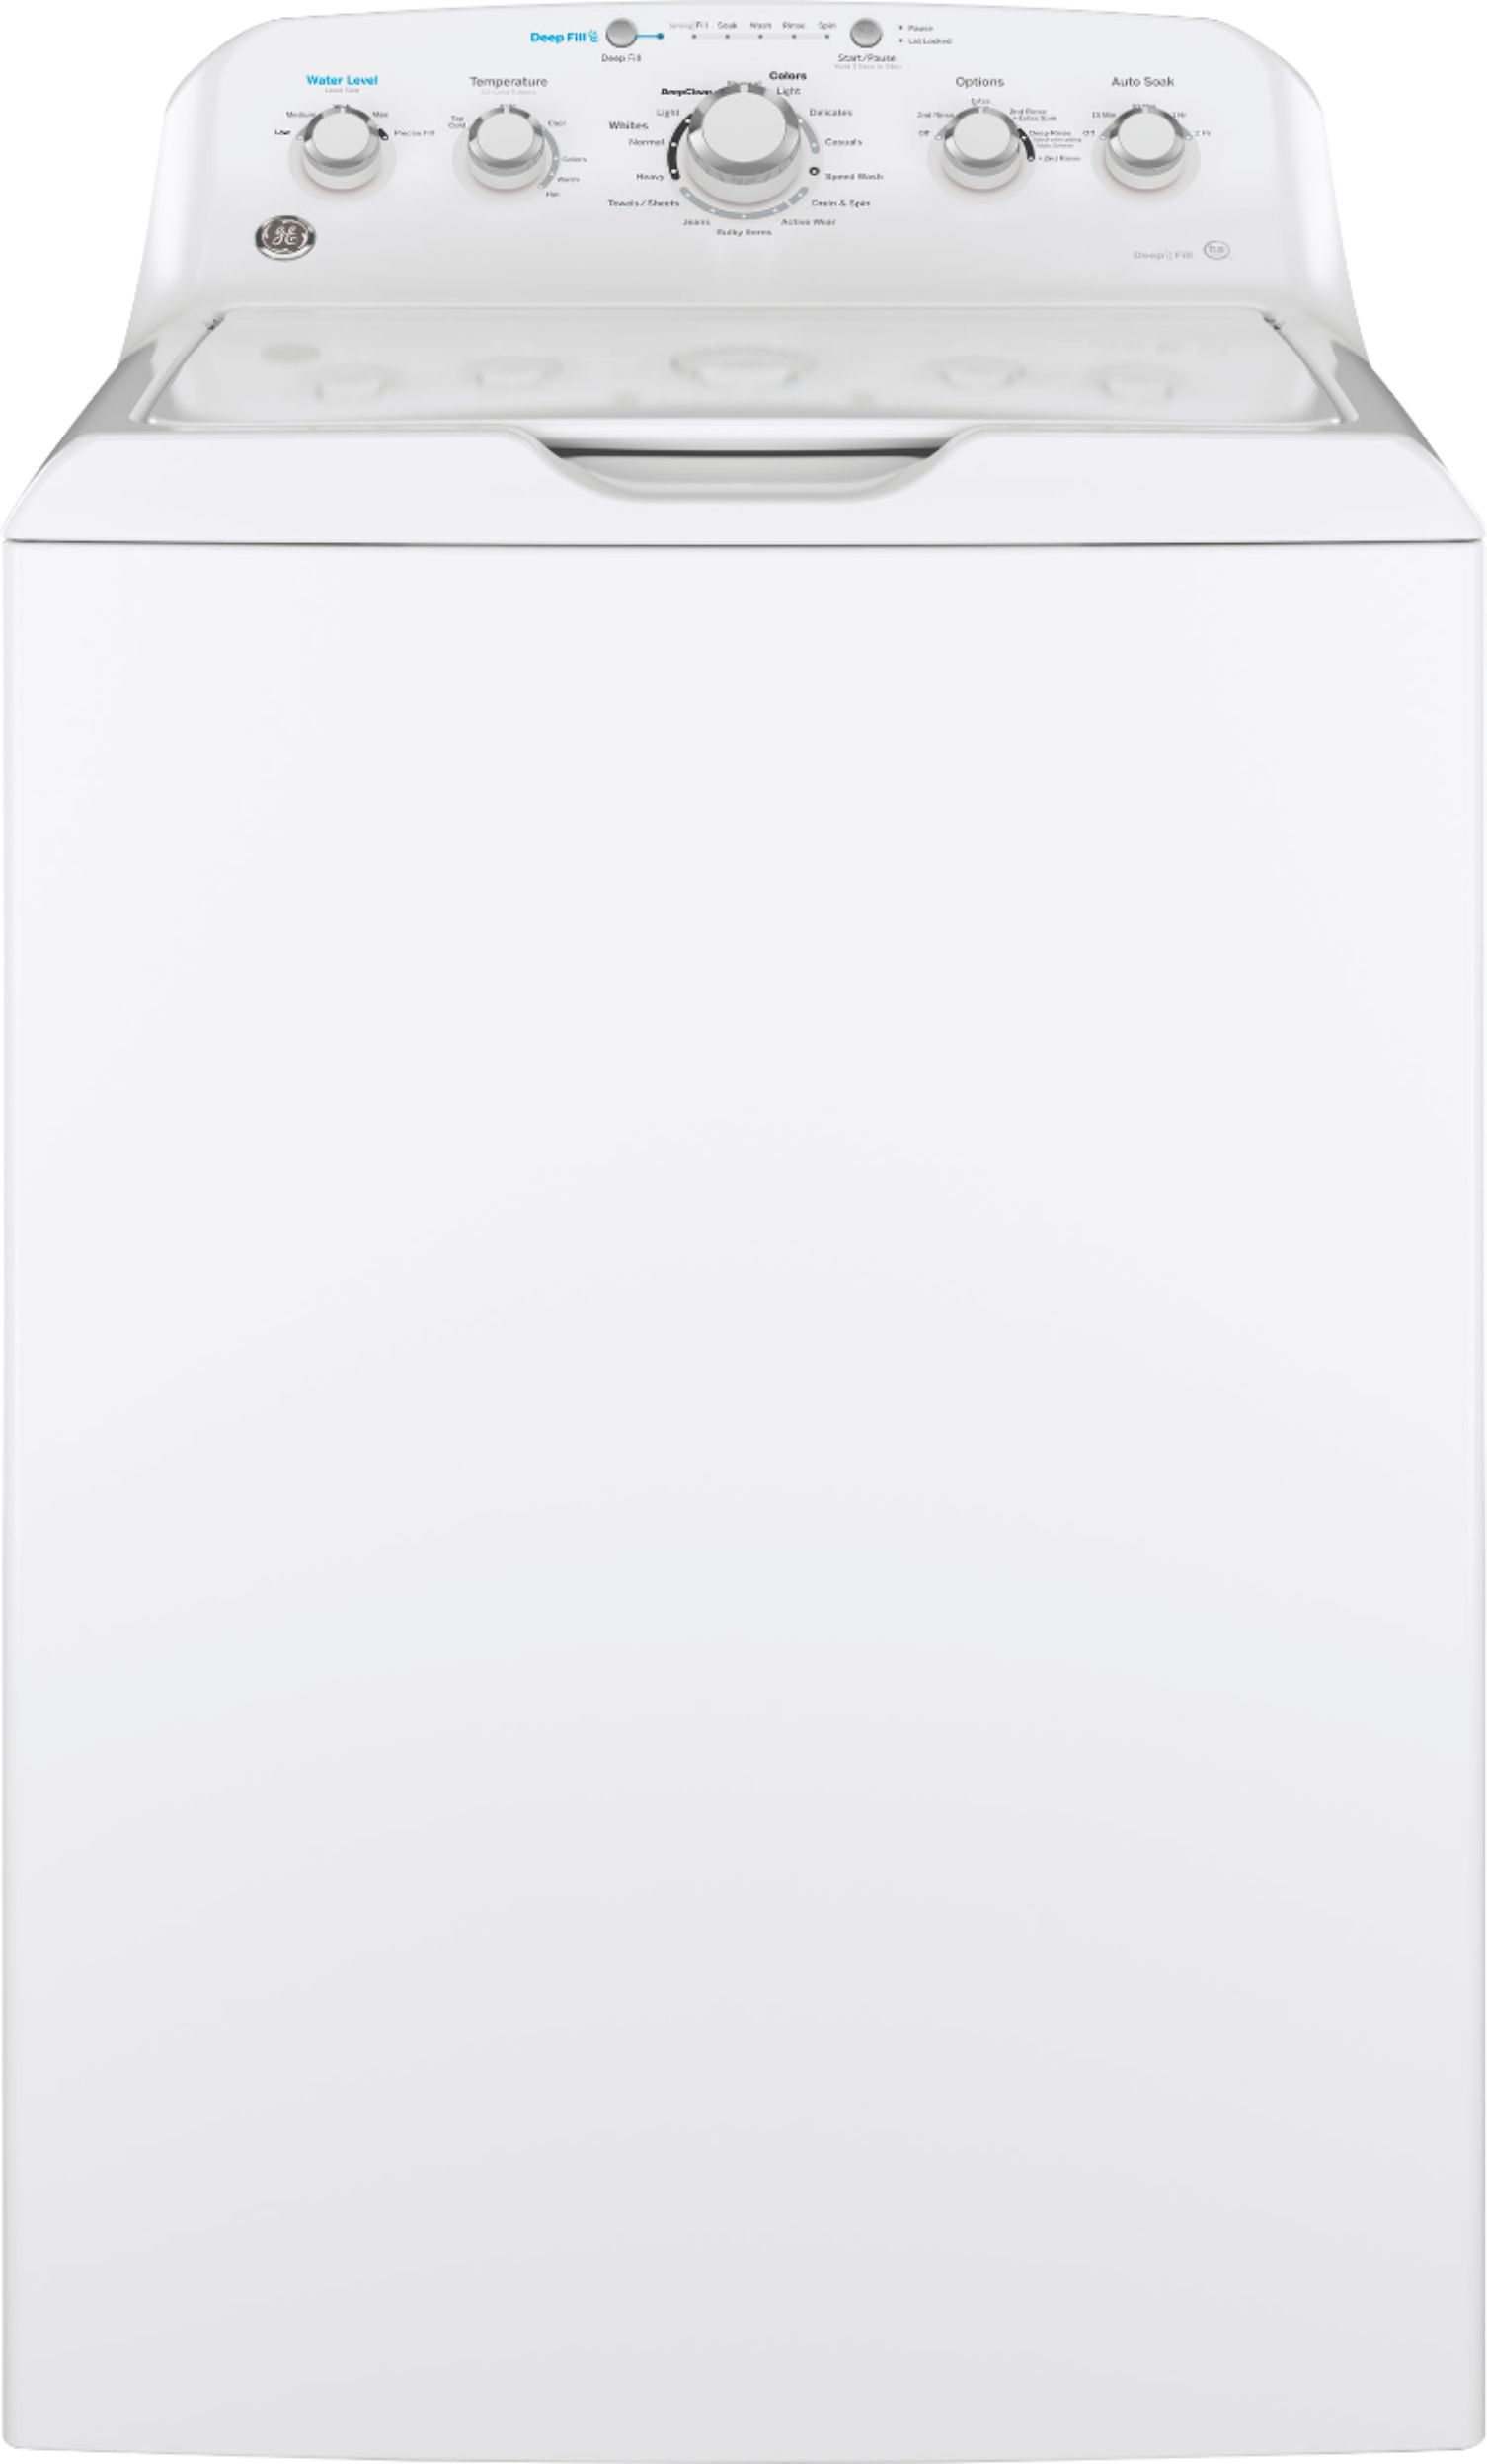 GE 4.5 cu ft Top Load Washer with Precise Fill, Deep Fill, Deep Clean and  Deep Rinse White on White GTW465ASNWW - Best Buy